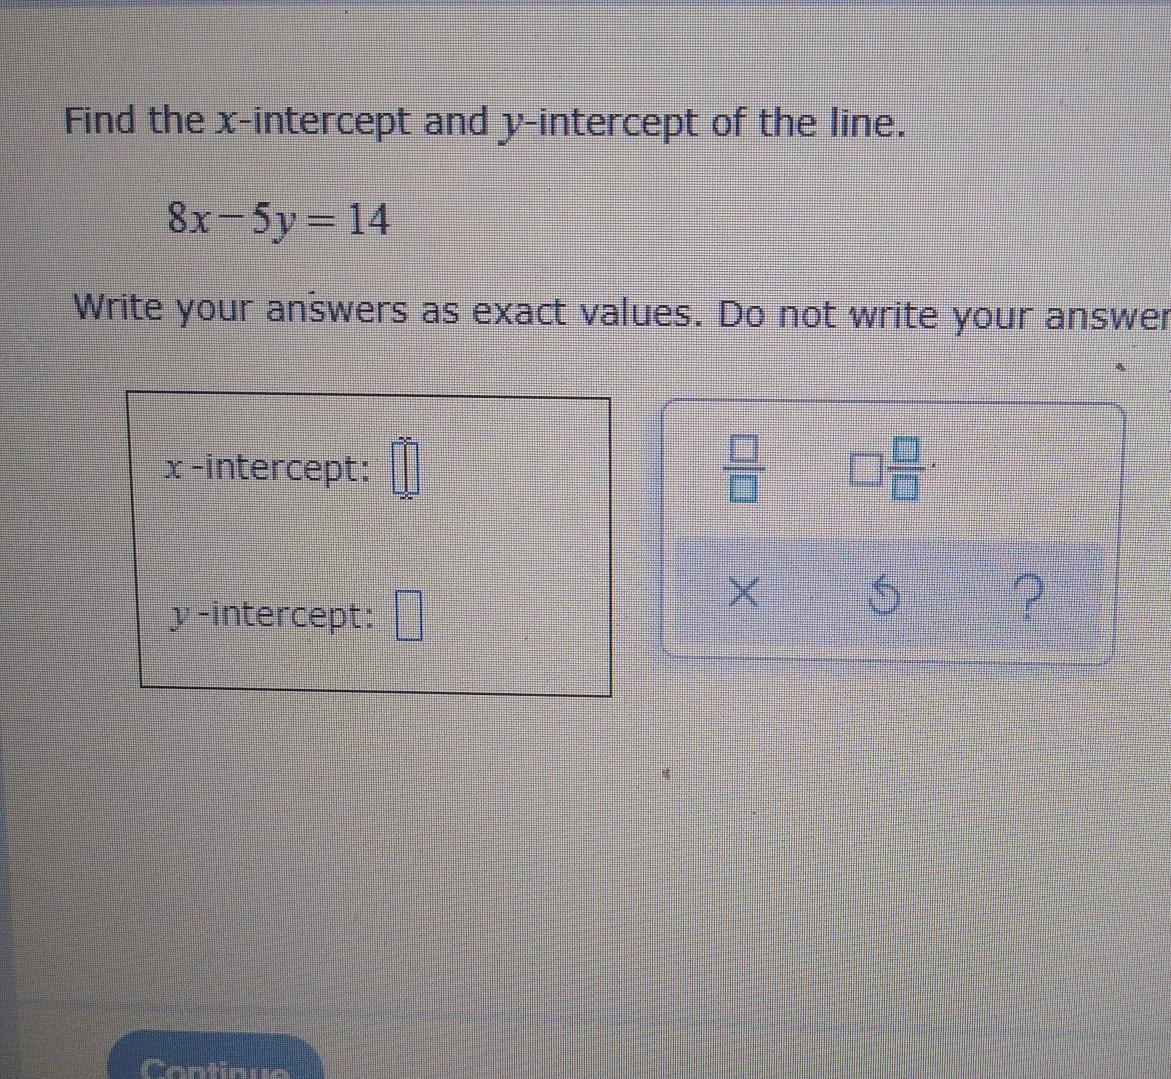 Find The X-intercept And Y-Intercept Of The Line. Write Your Answer As Exact Values. Do Not Write Your